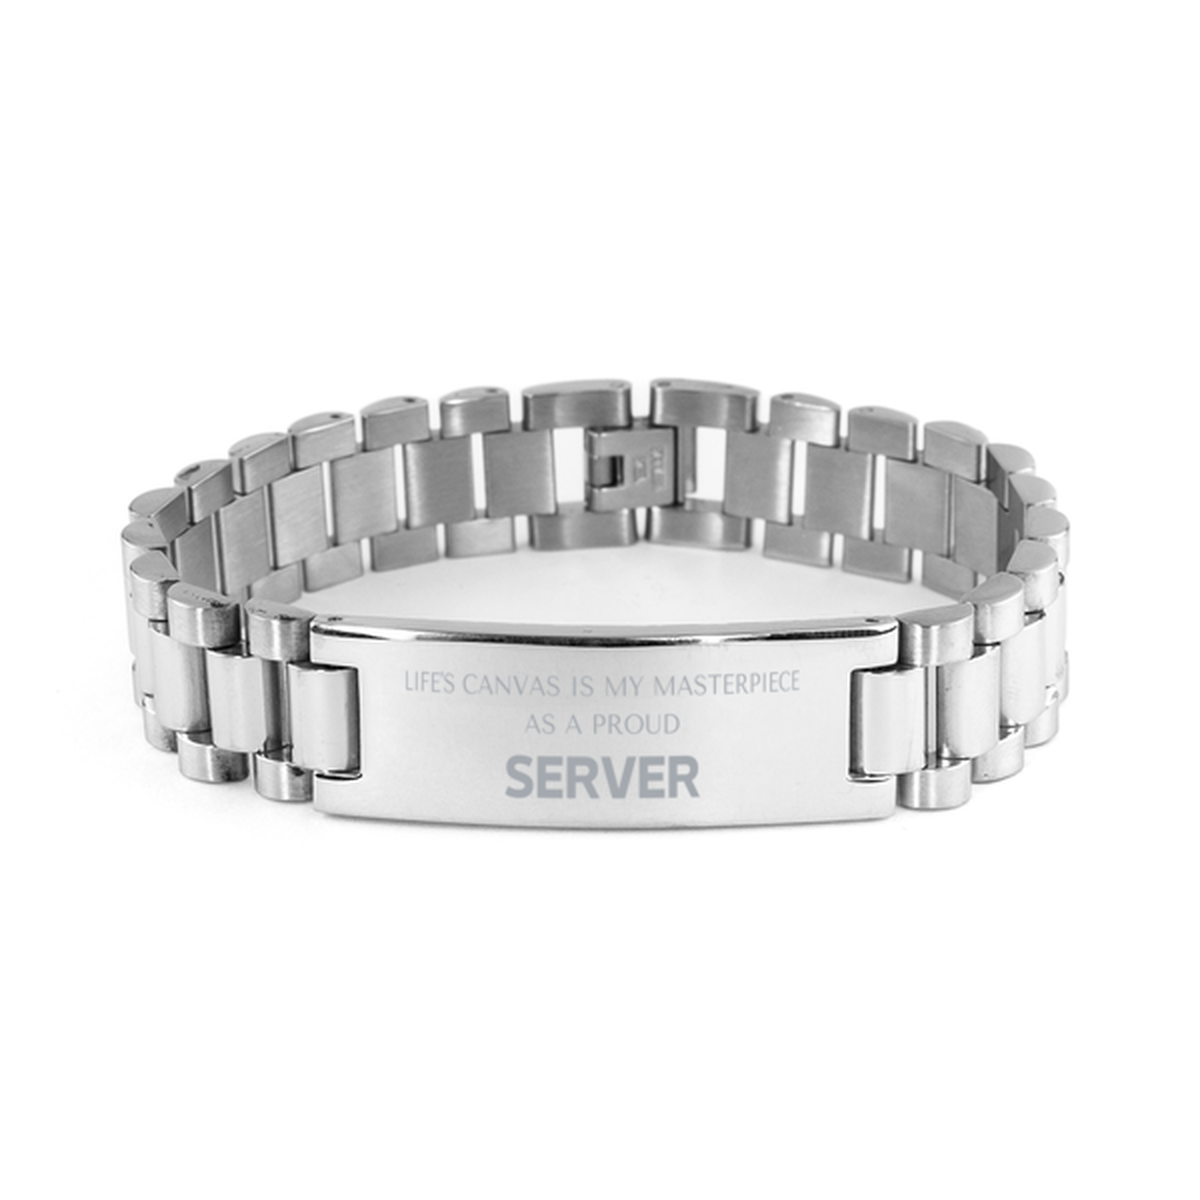 Proud Server Gifts, Life's canvas is my masterpiece, Epic Birthday Christmas Unique Ladder Stainless Steel Bracelet For Server, Coworkers, Men, Women, Friends